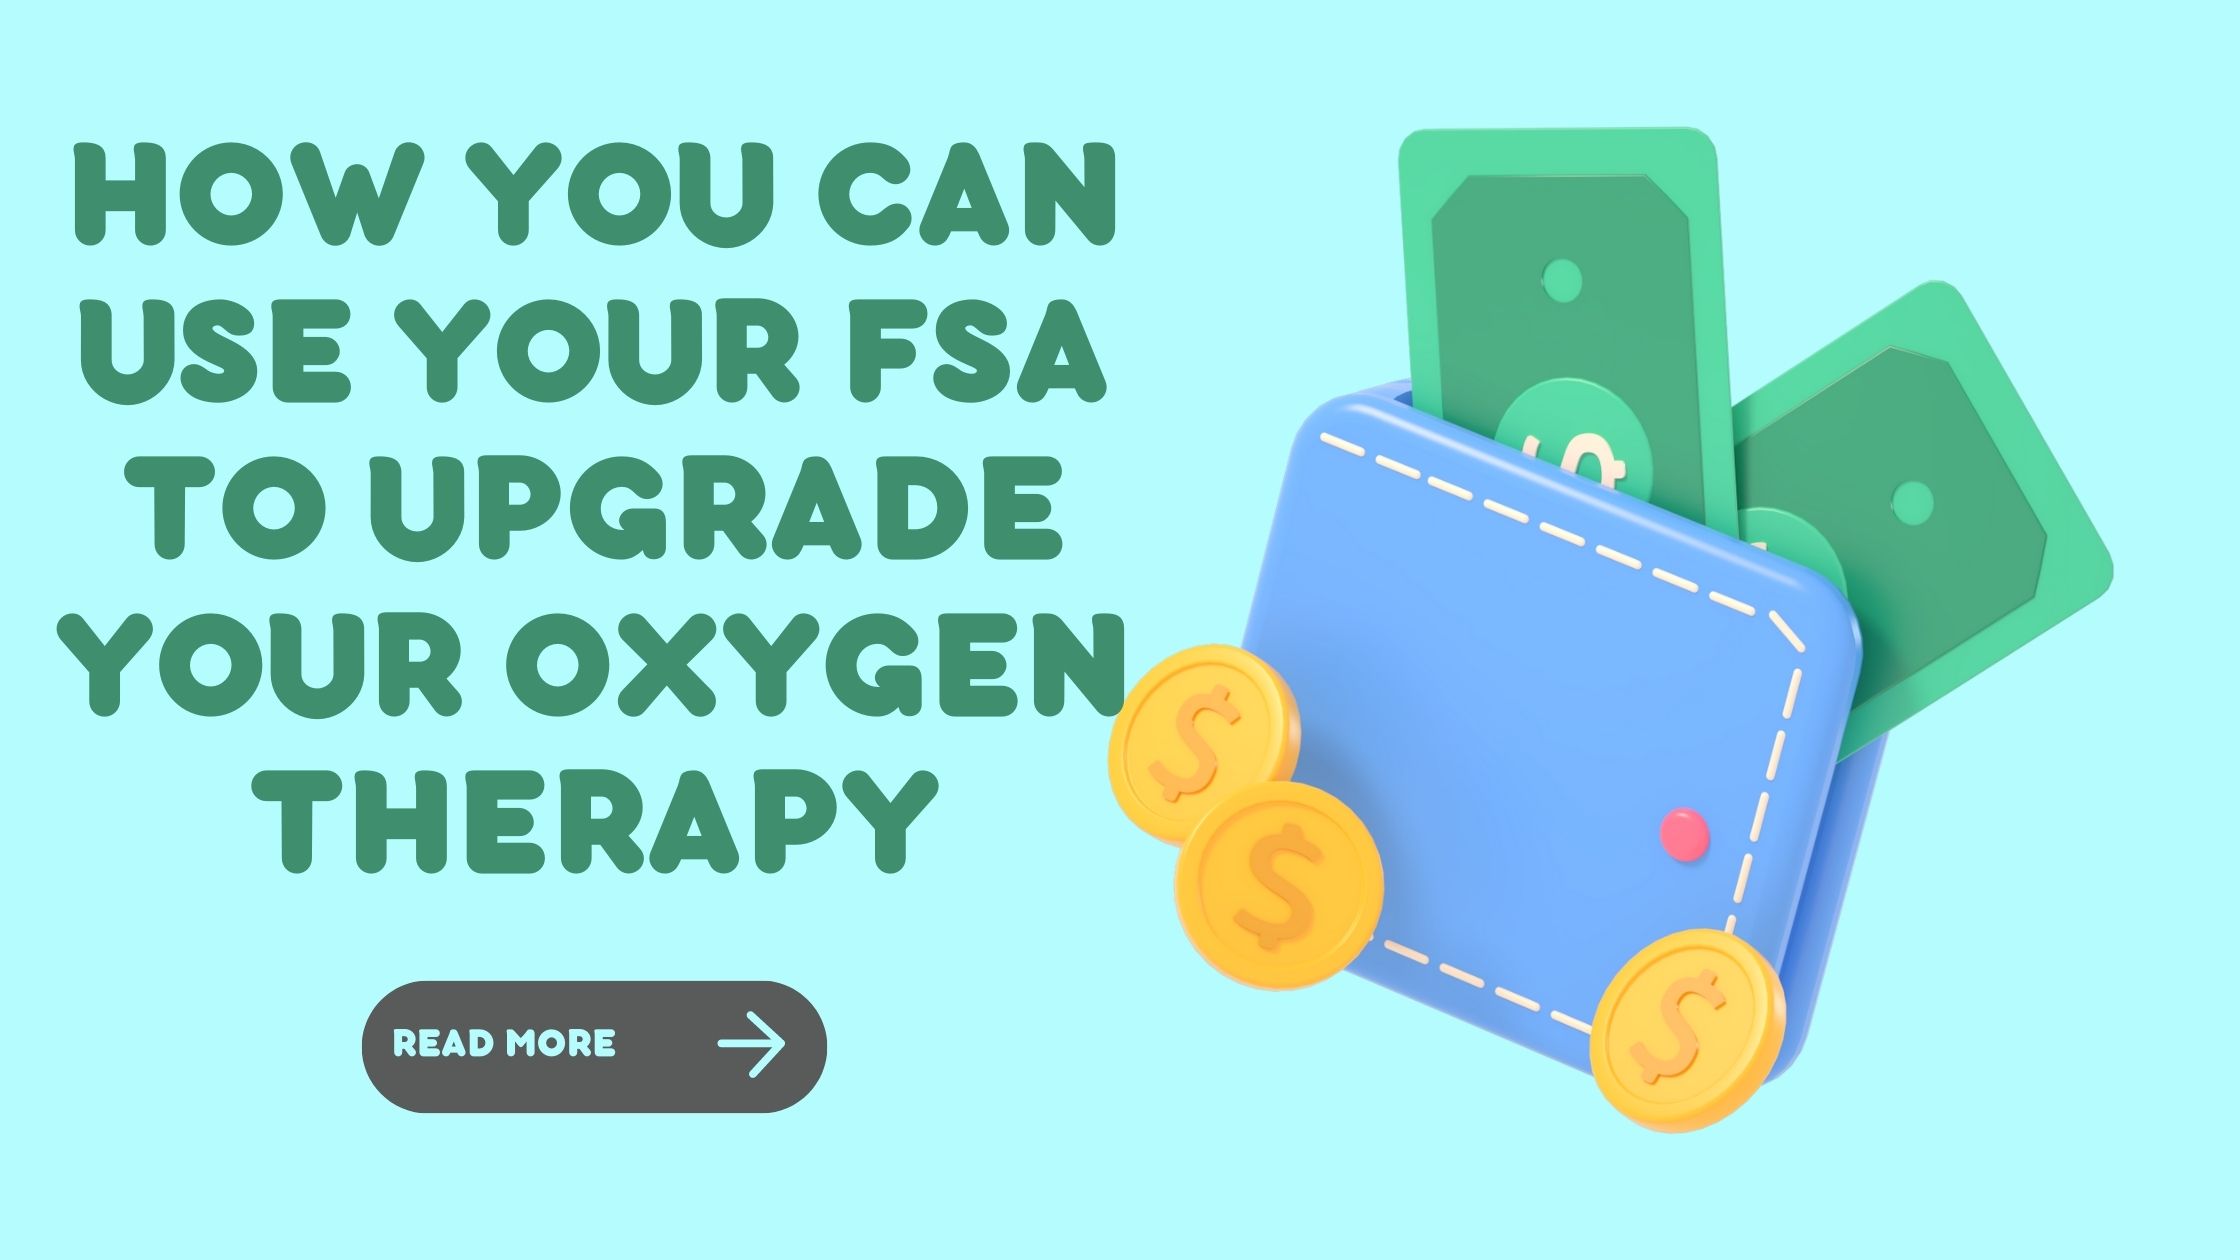 How You Can Use Your FSA to Upgrade Your Oxygen Therapy